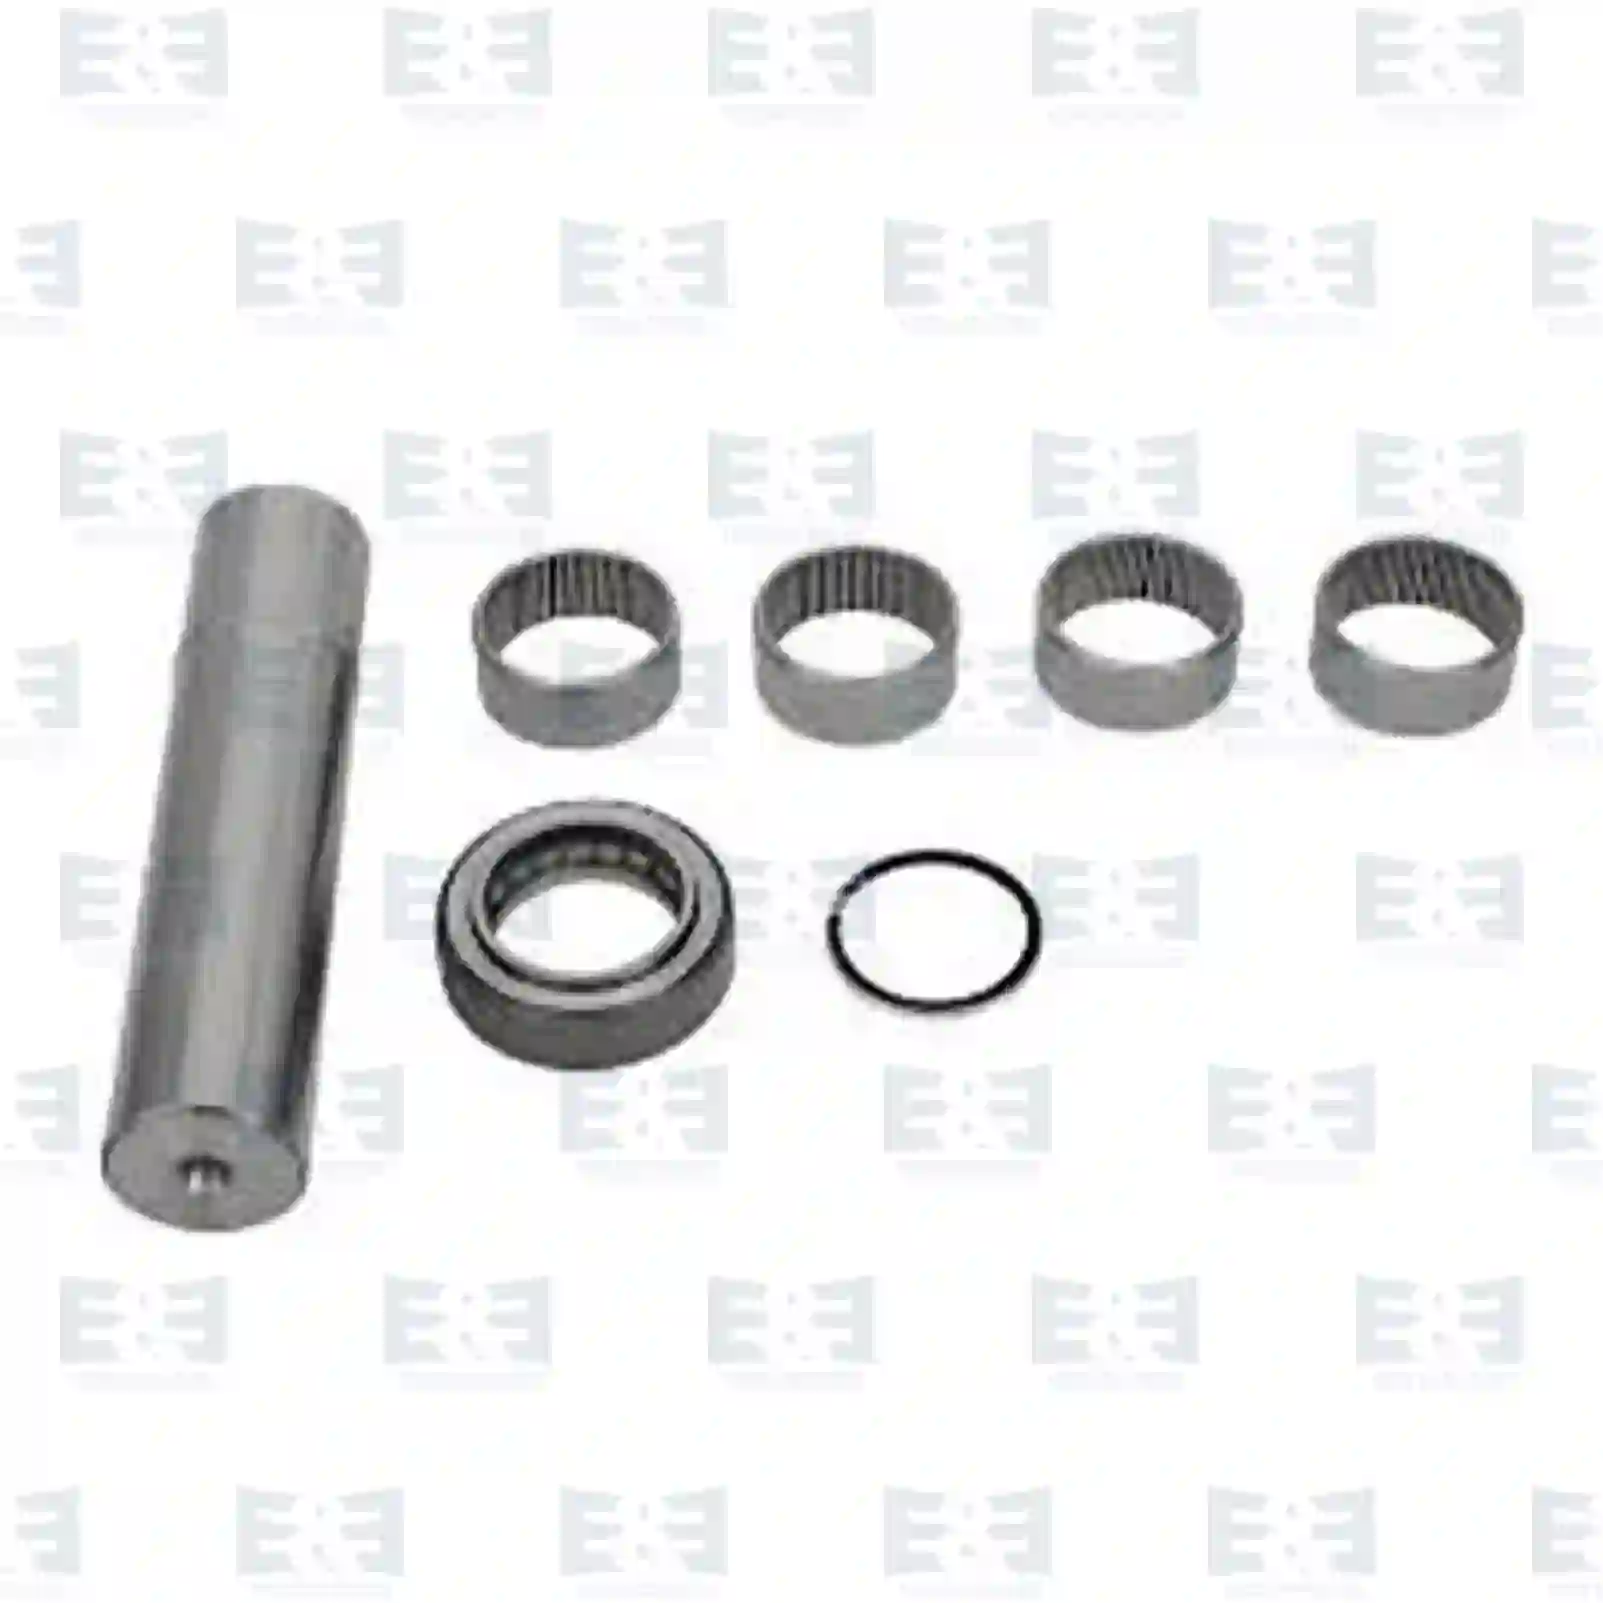 Axles King pin kit, EE No 2E2270476 ,  oem no:3563300019, 3563300119, 3563300219, 3573300119, 6553300219, 6553300619 E&E Truck Spare Parts | Truck Spare Parts, Auotomotive Spare Parts